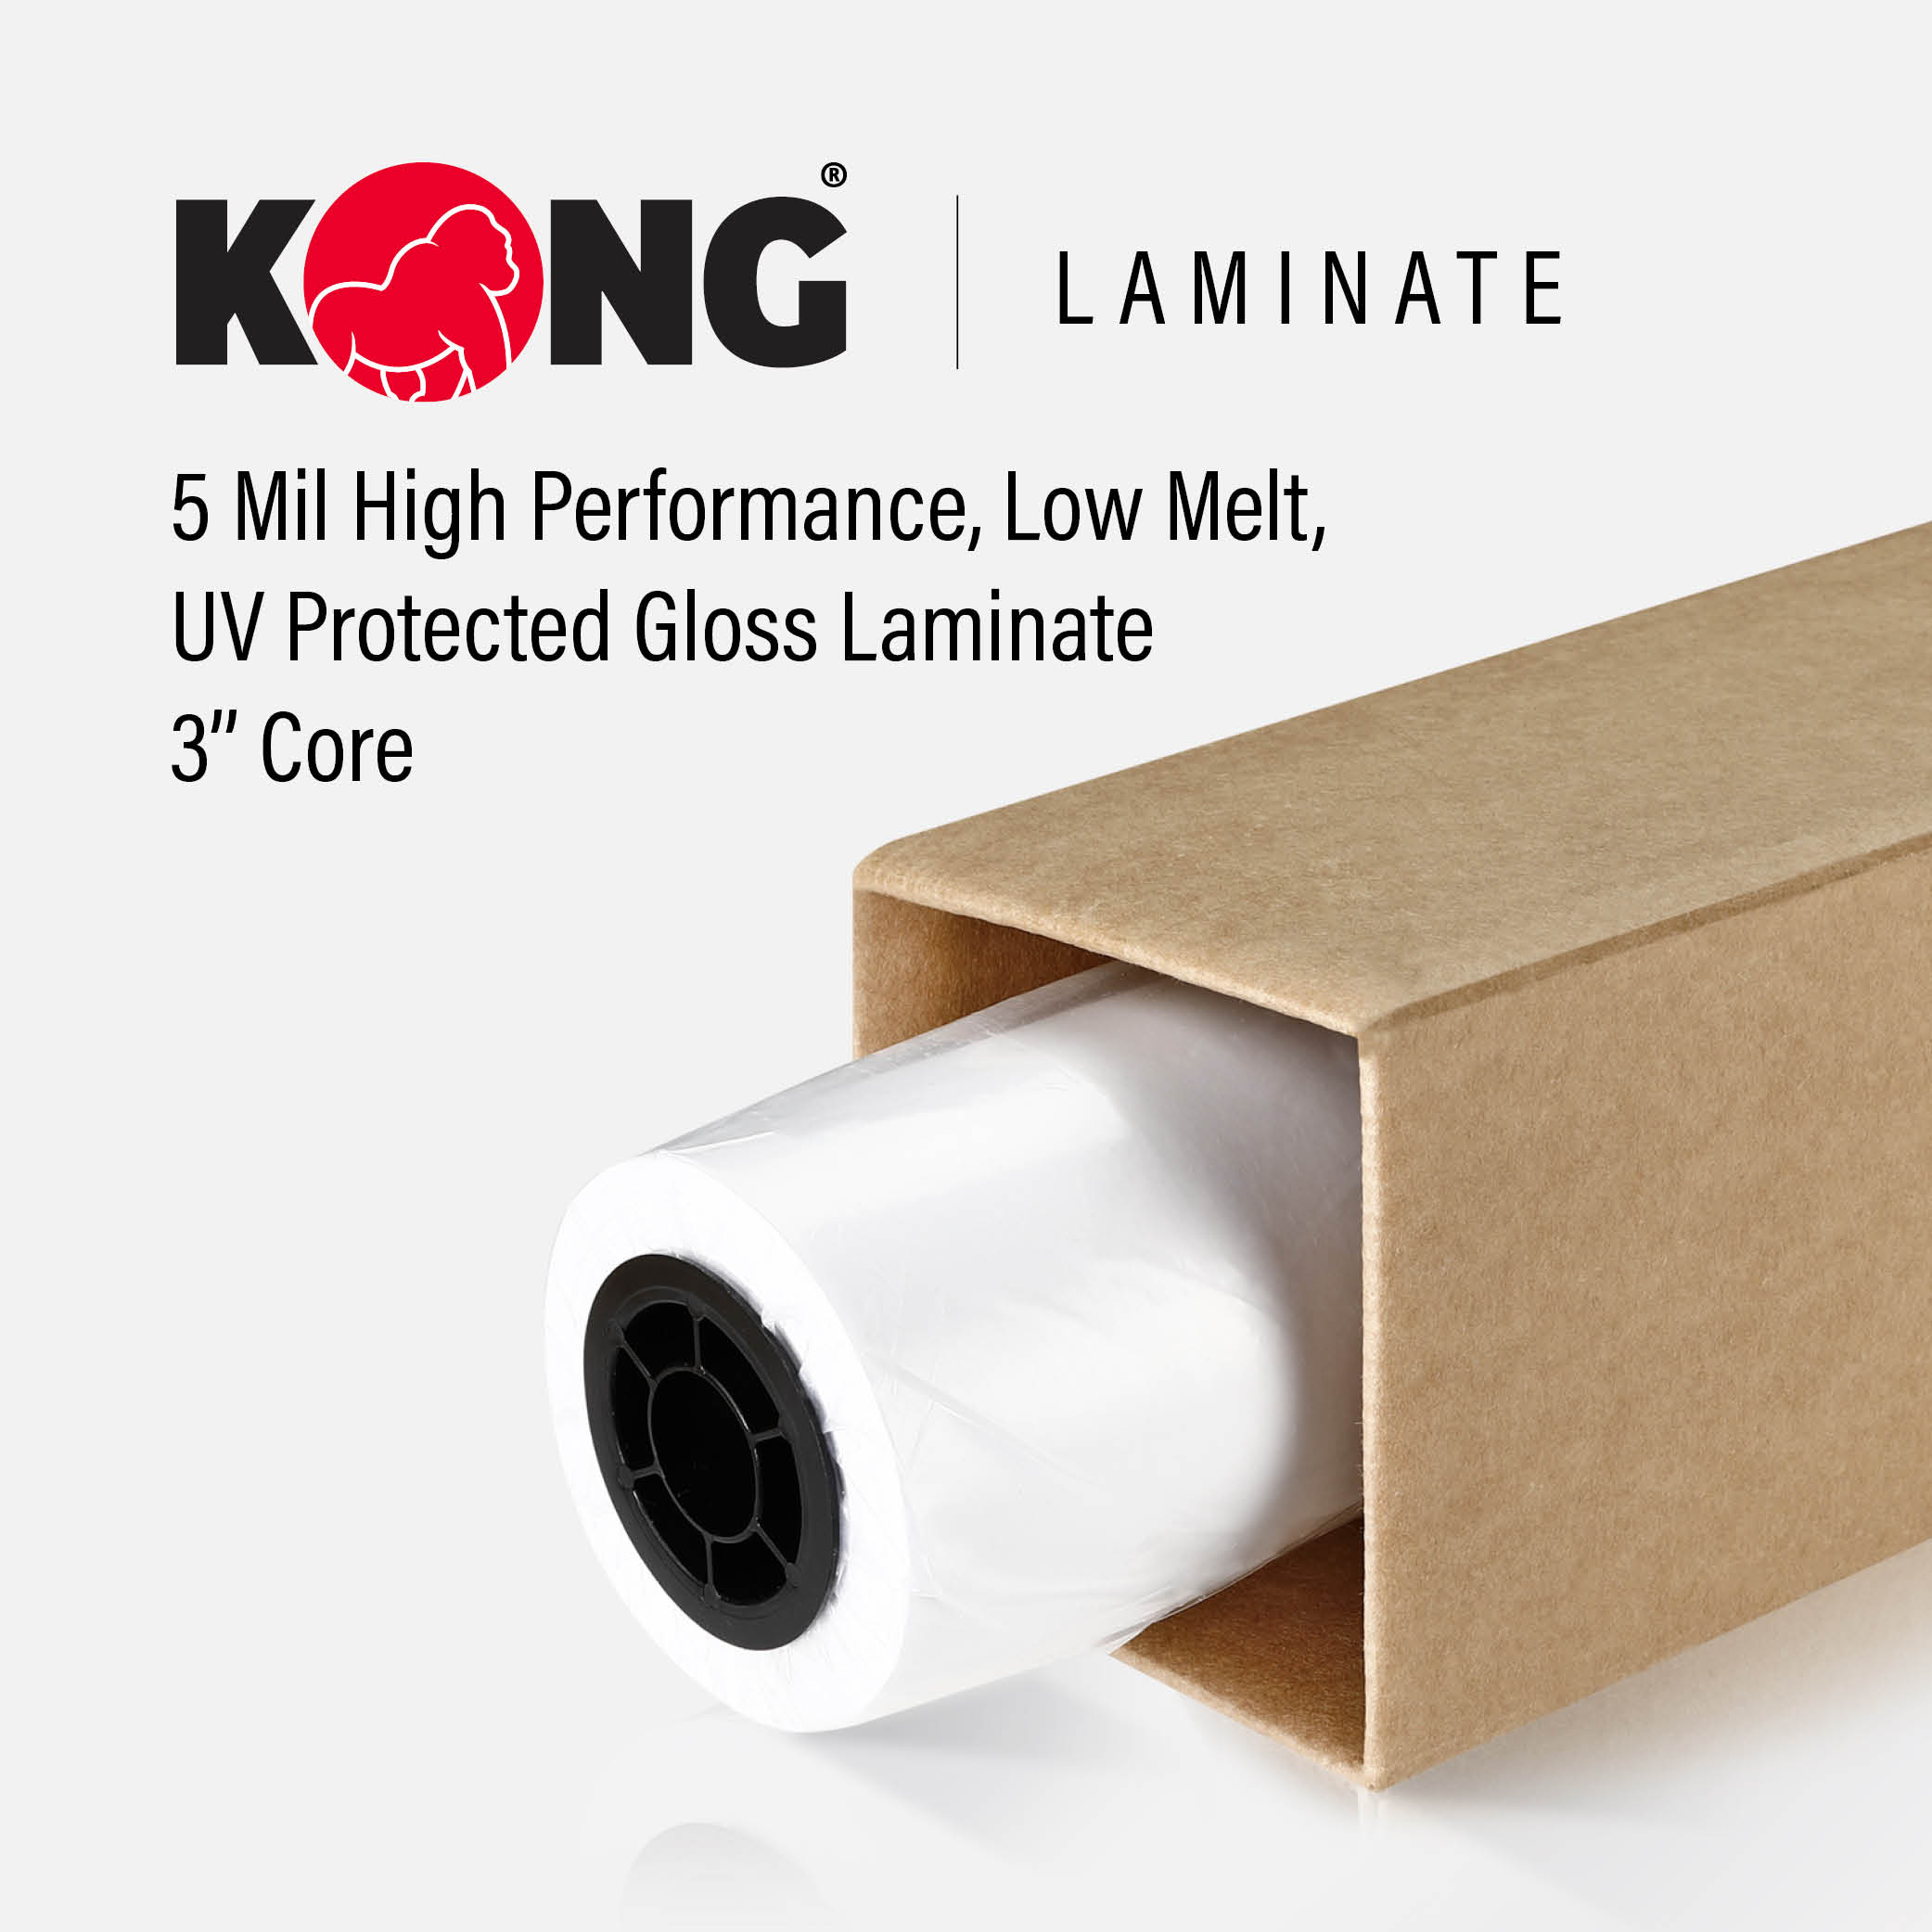 38'' x 250' Roll - 5 MIL High Performance, Low Melt, UV Protected Gloss Laminate - 3'' Core